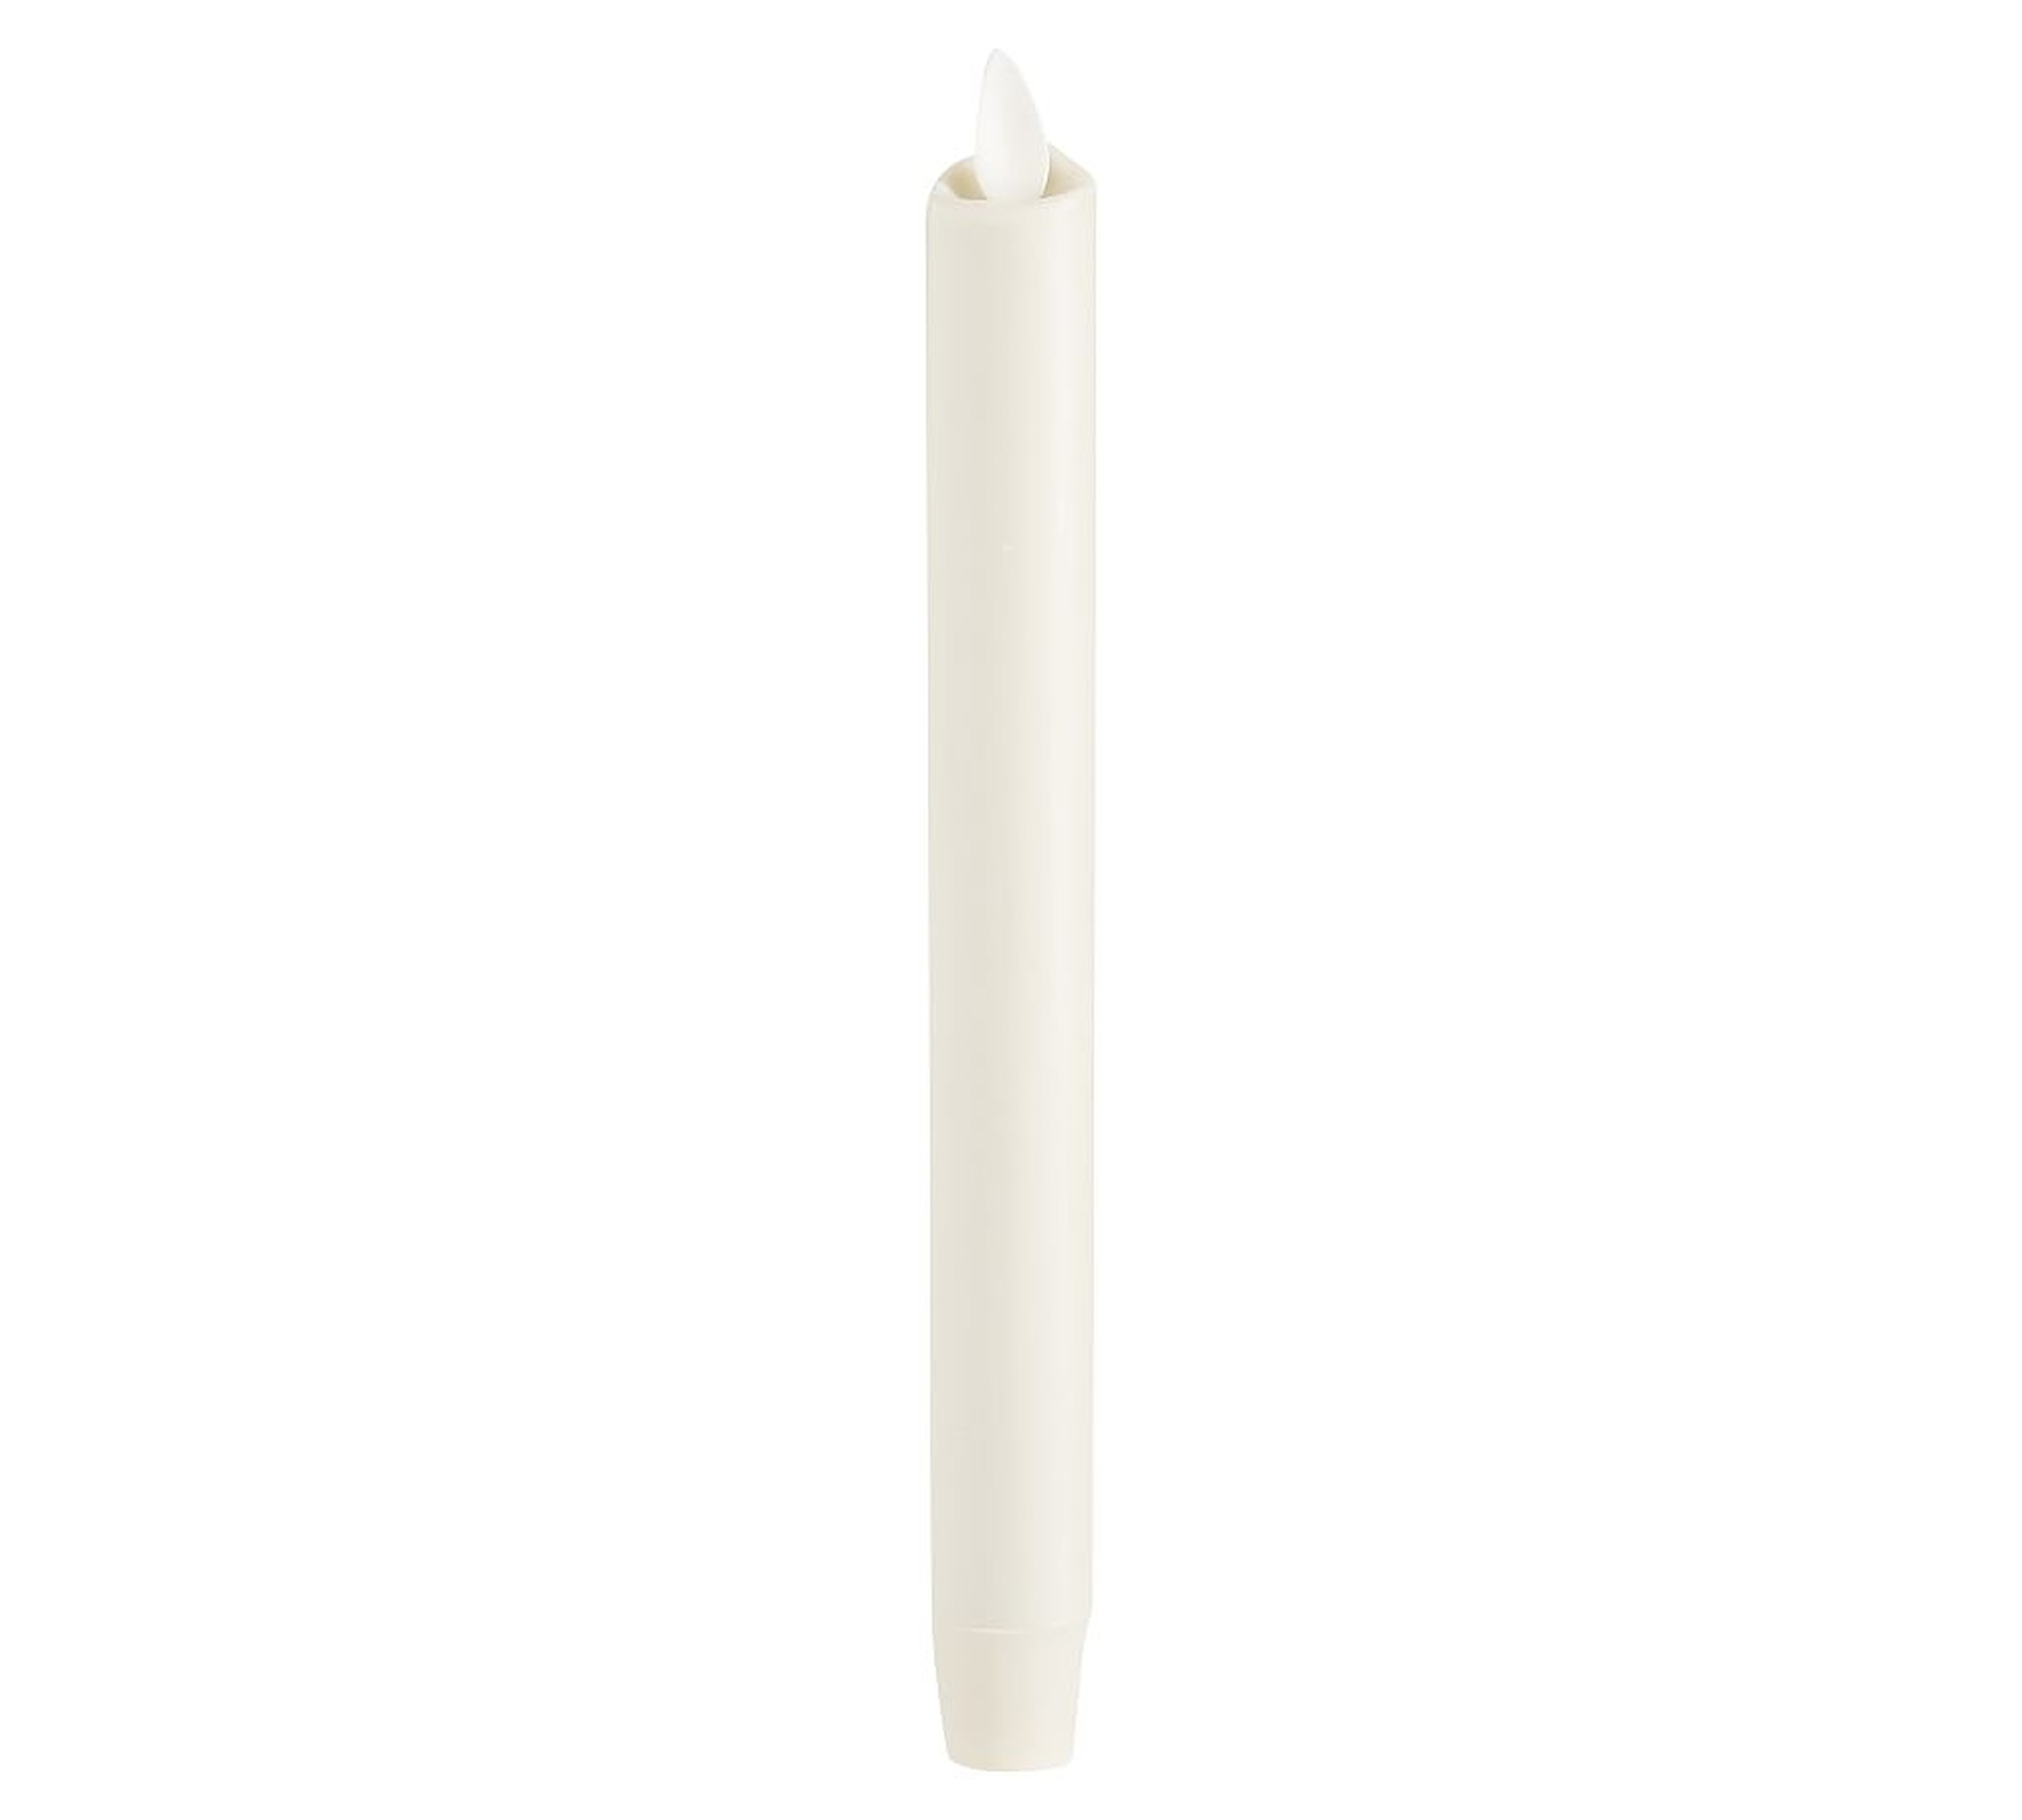 Premium Flicker Flameless Wax Taper Candle, White, Set of 2, 8'' - Pottery Barn